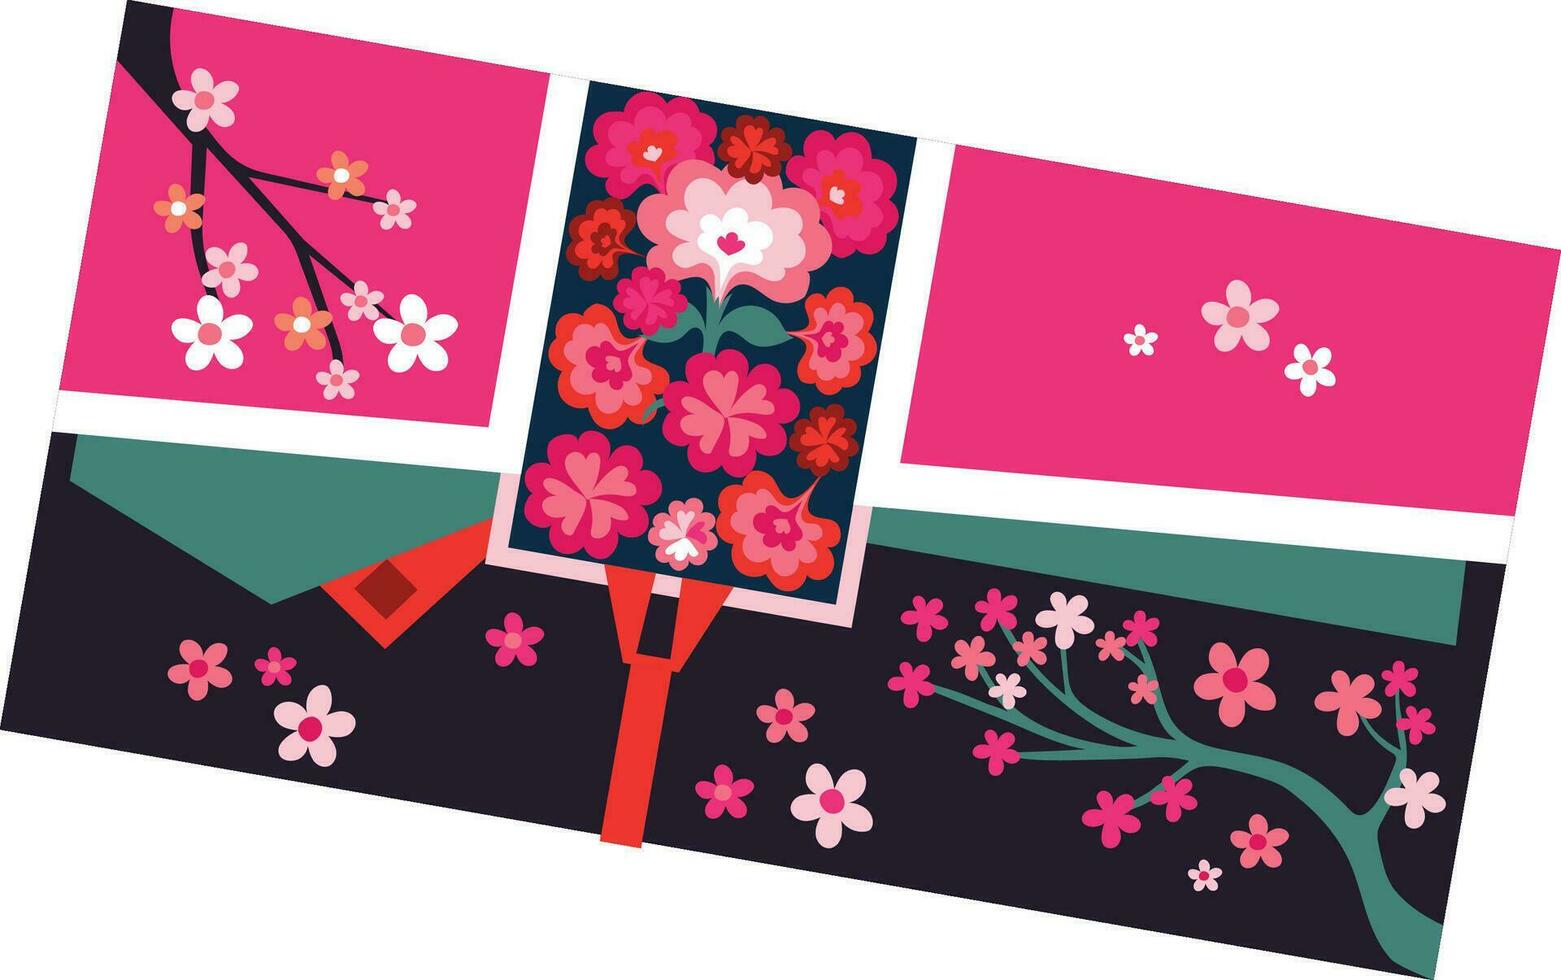 Save the date floral wedding card set,japan fan and flowers vector